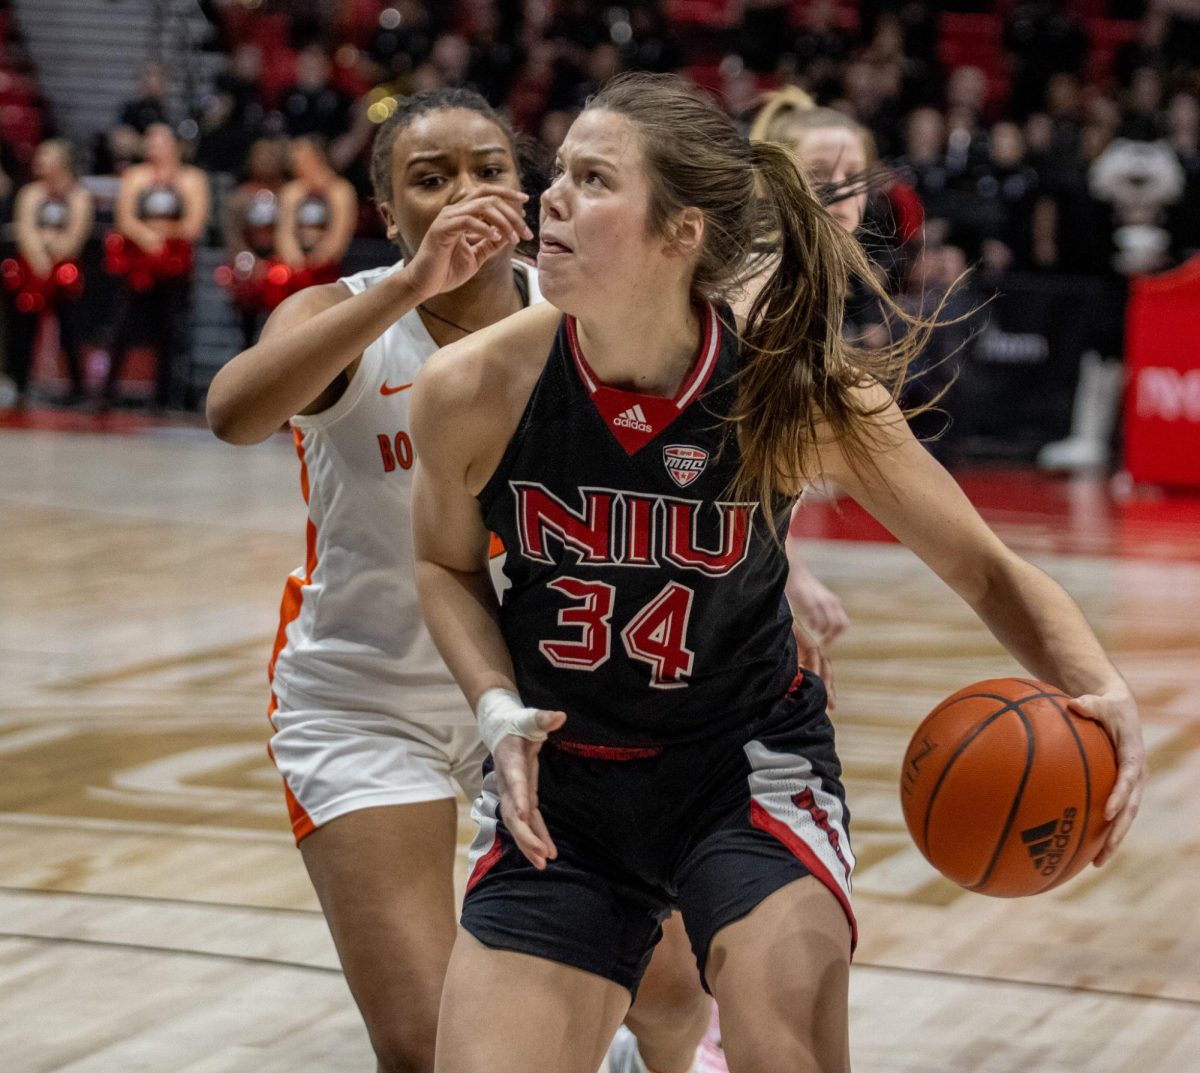 Senior+forward+Brooke+Stonebraker+%2834%29+looks+to+put+up+a+shot+past+Bowling+Green+defenders.+Stonebraker+had+13+points+and+nine+rebounds+as+the+Huskies+lost+to+Bowling+Green+Saturday+82-73.+%28Tim+Dodge+%7C+Northern+Star%29